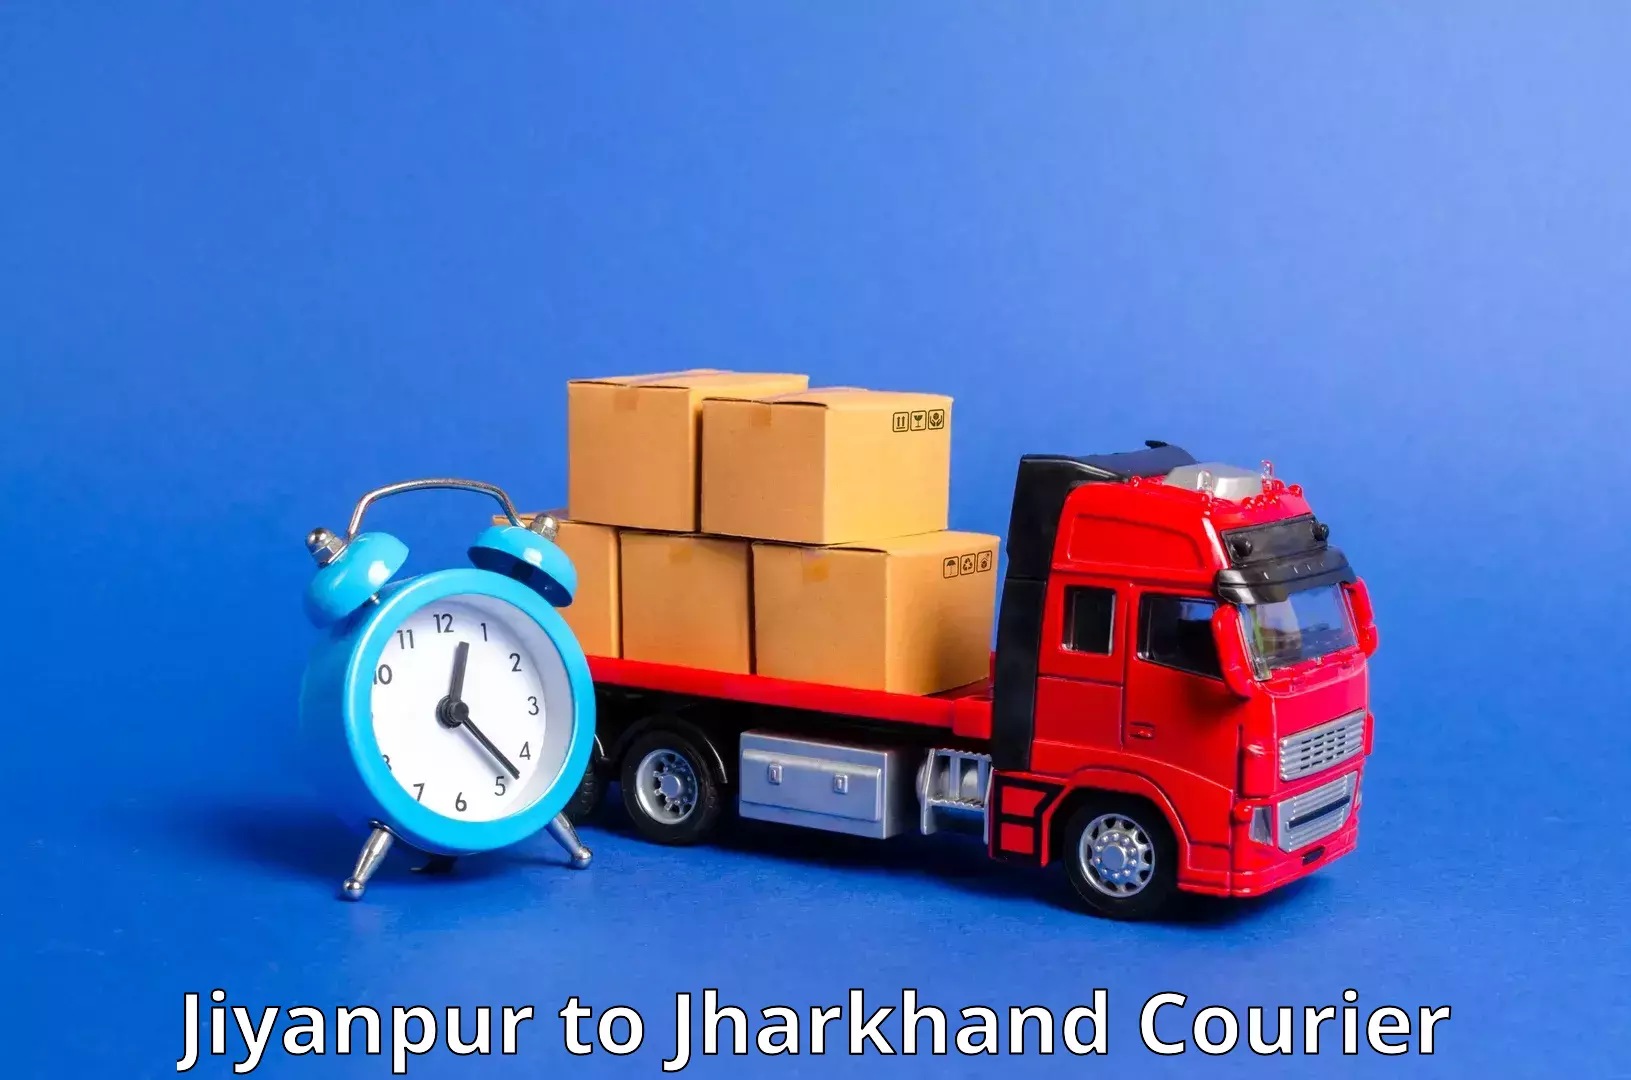 Reliable shipping partners Jiyanpur to Jharkhand